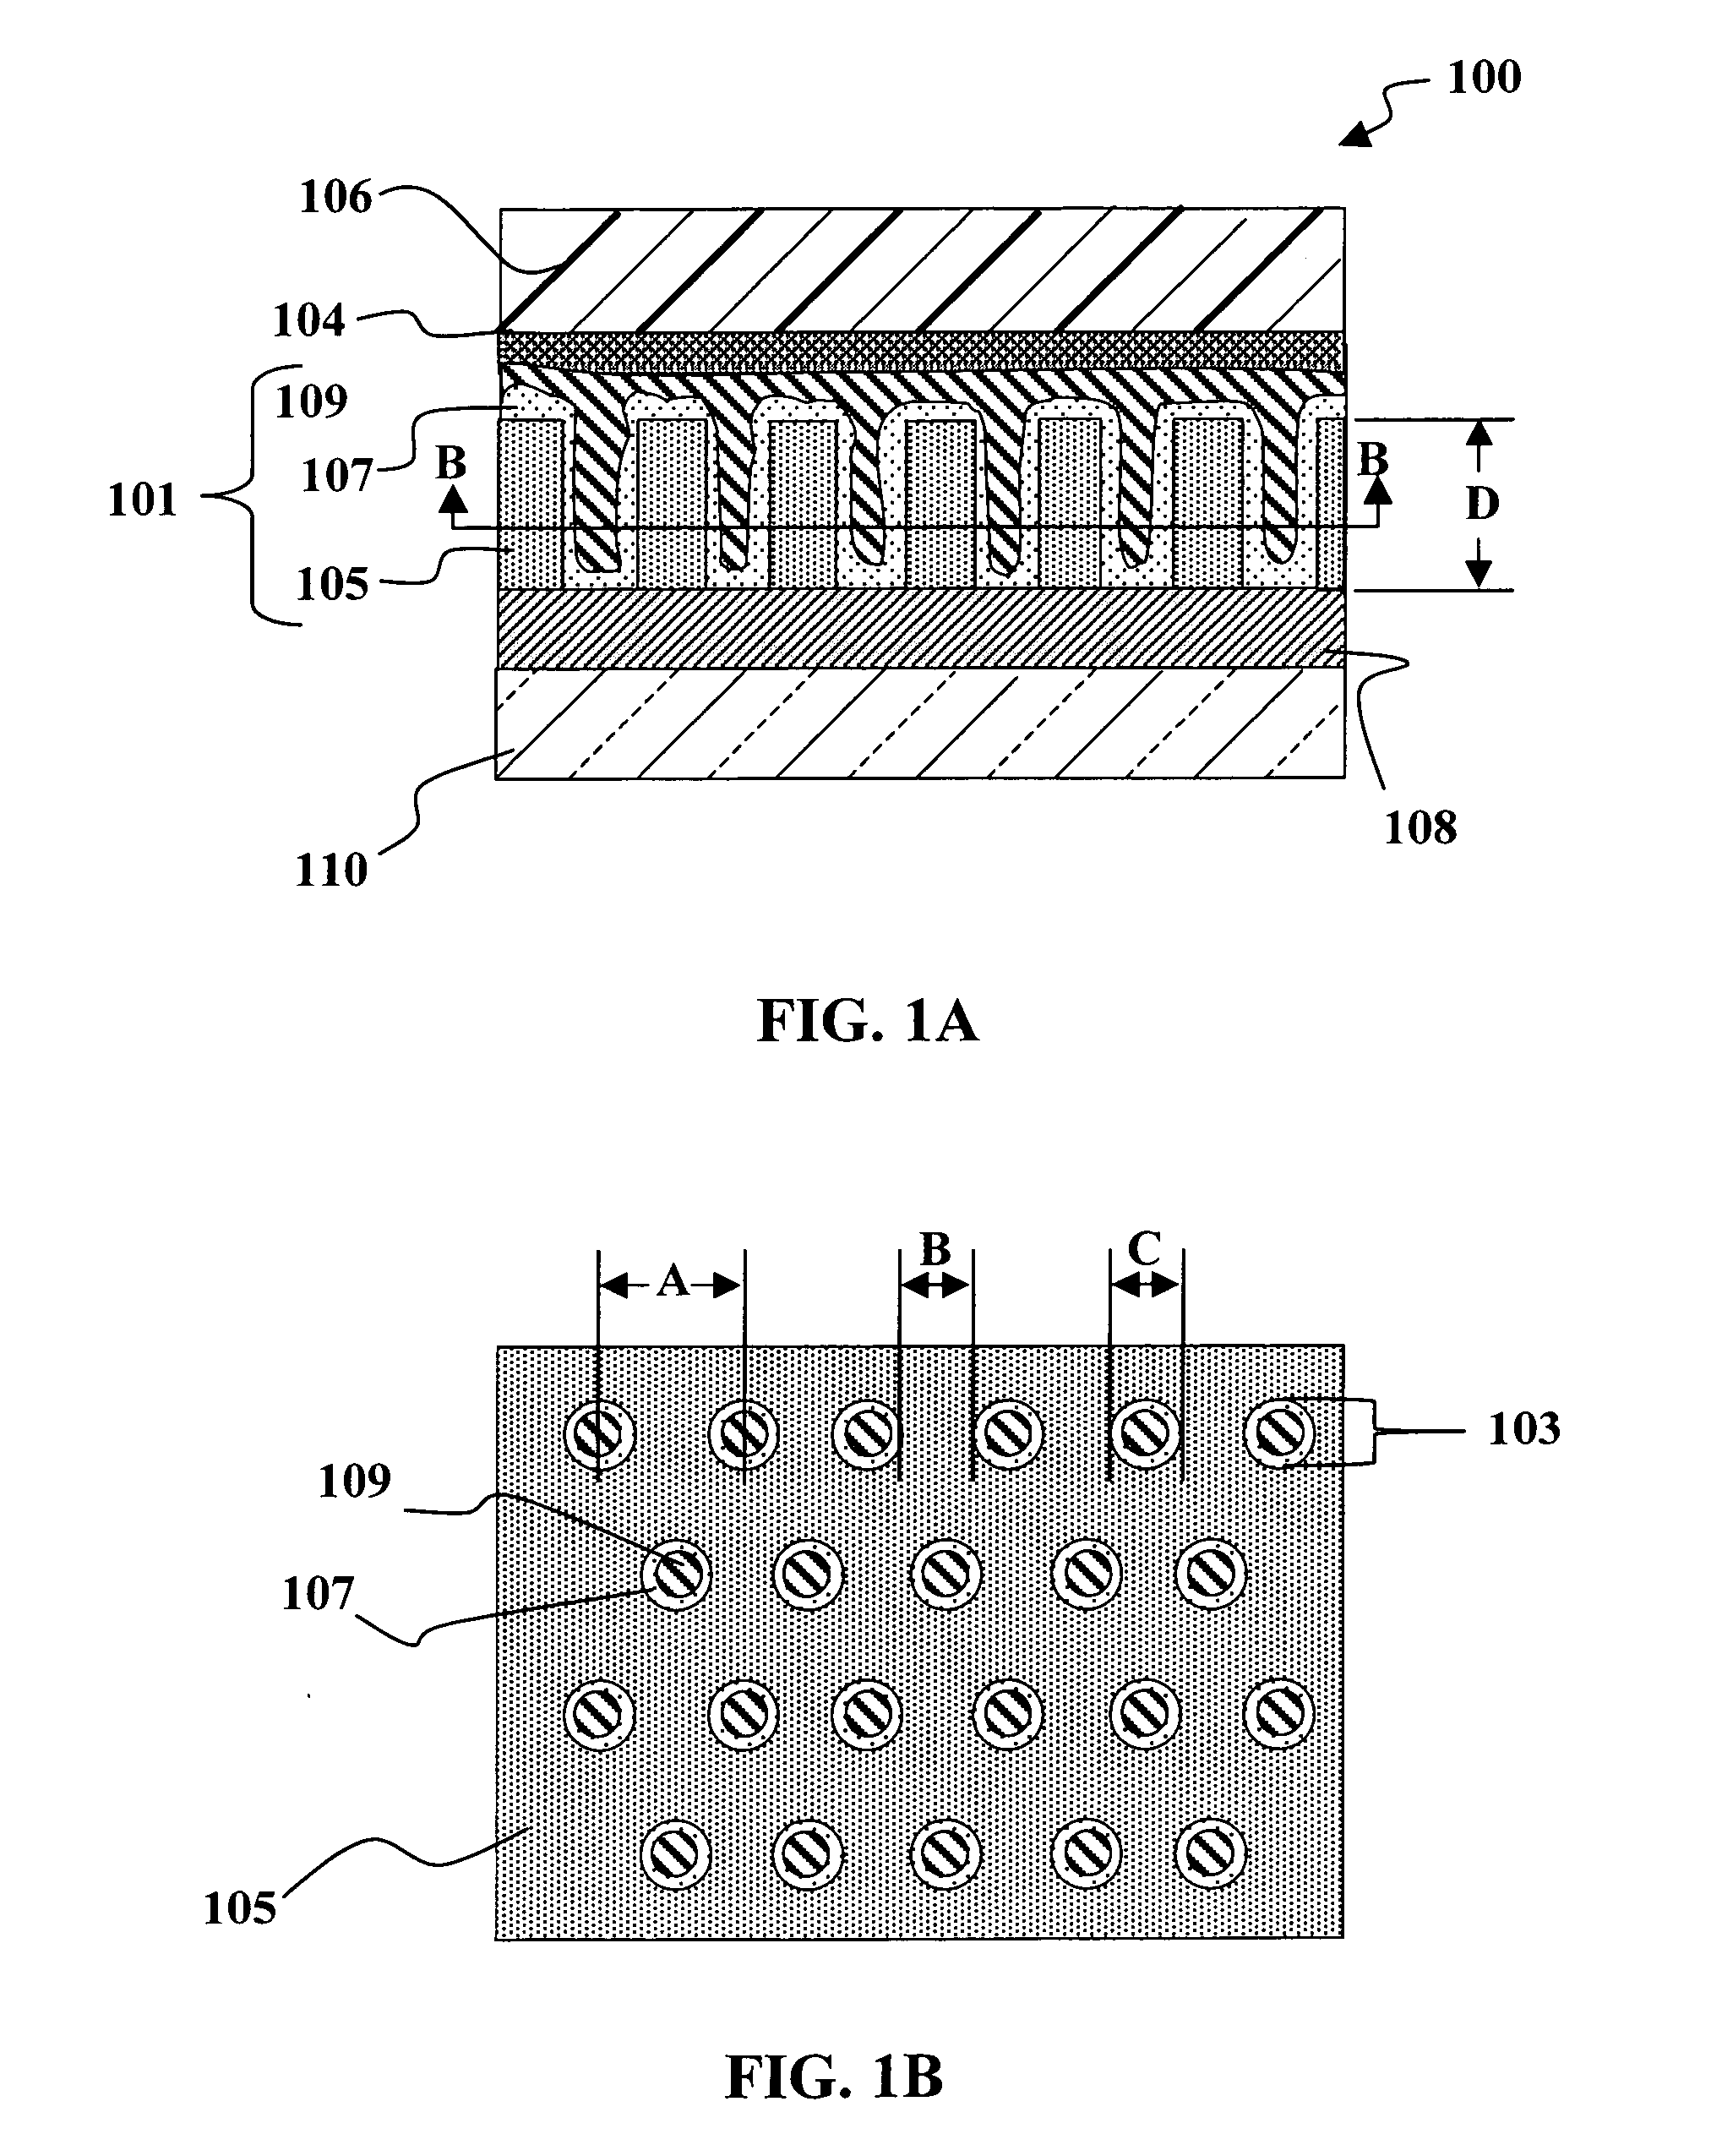 Photovoltaic devices fabricated by growth from porous template